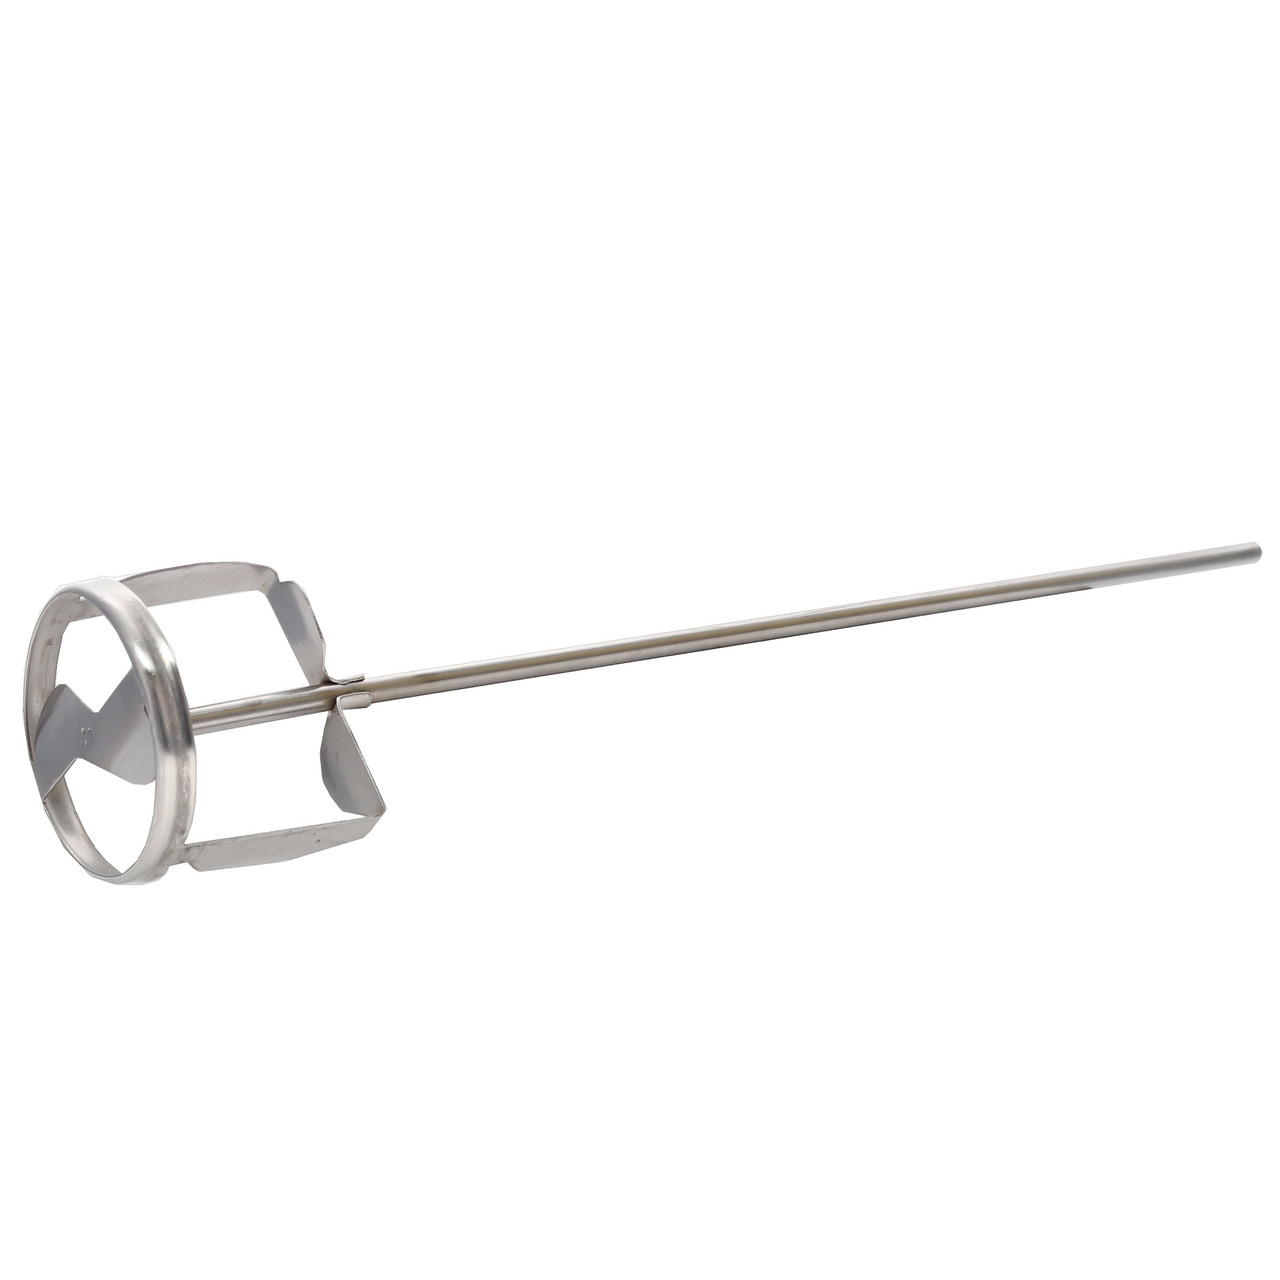 Jiffy Mixer Co. HS-2 1/4 Shaft 1-2 Gallon Stainless Steel Mixer Blade